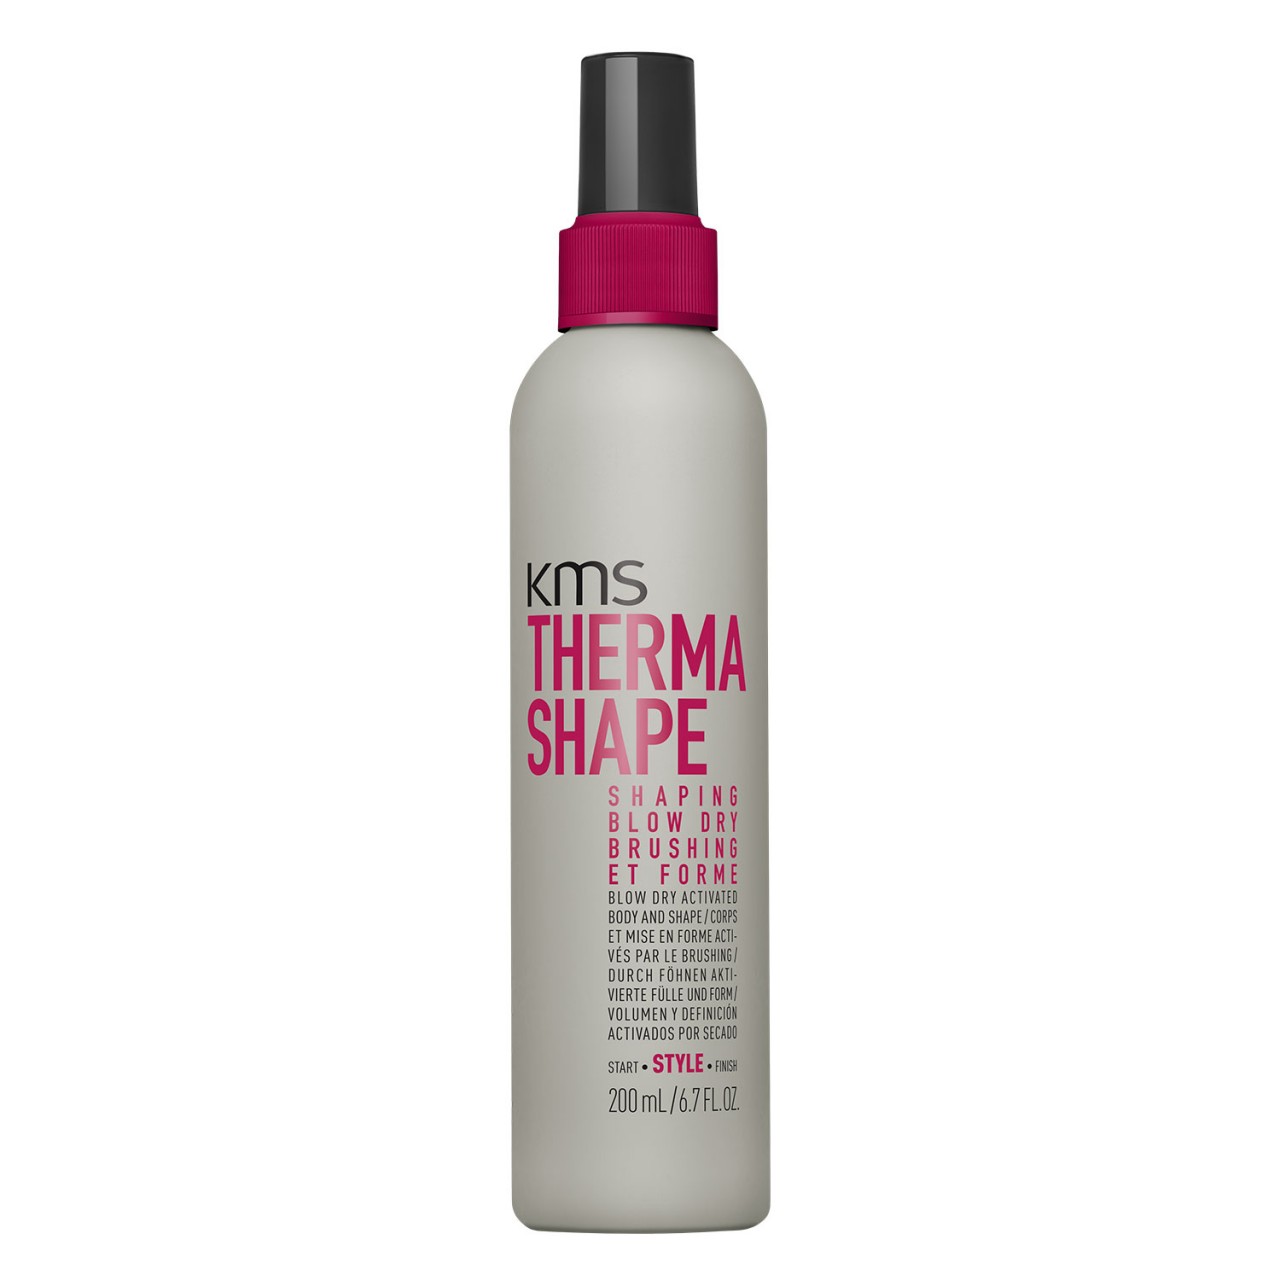 Thermashape - Shaping Blow Dry von KMS